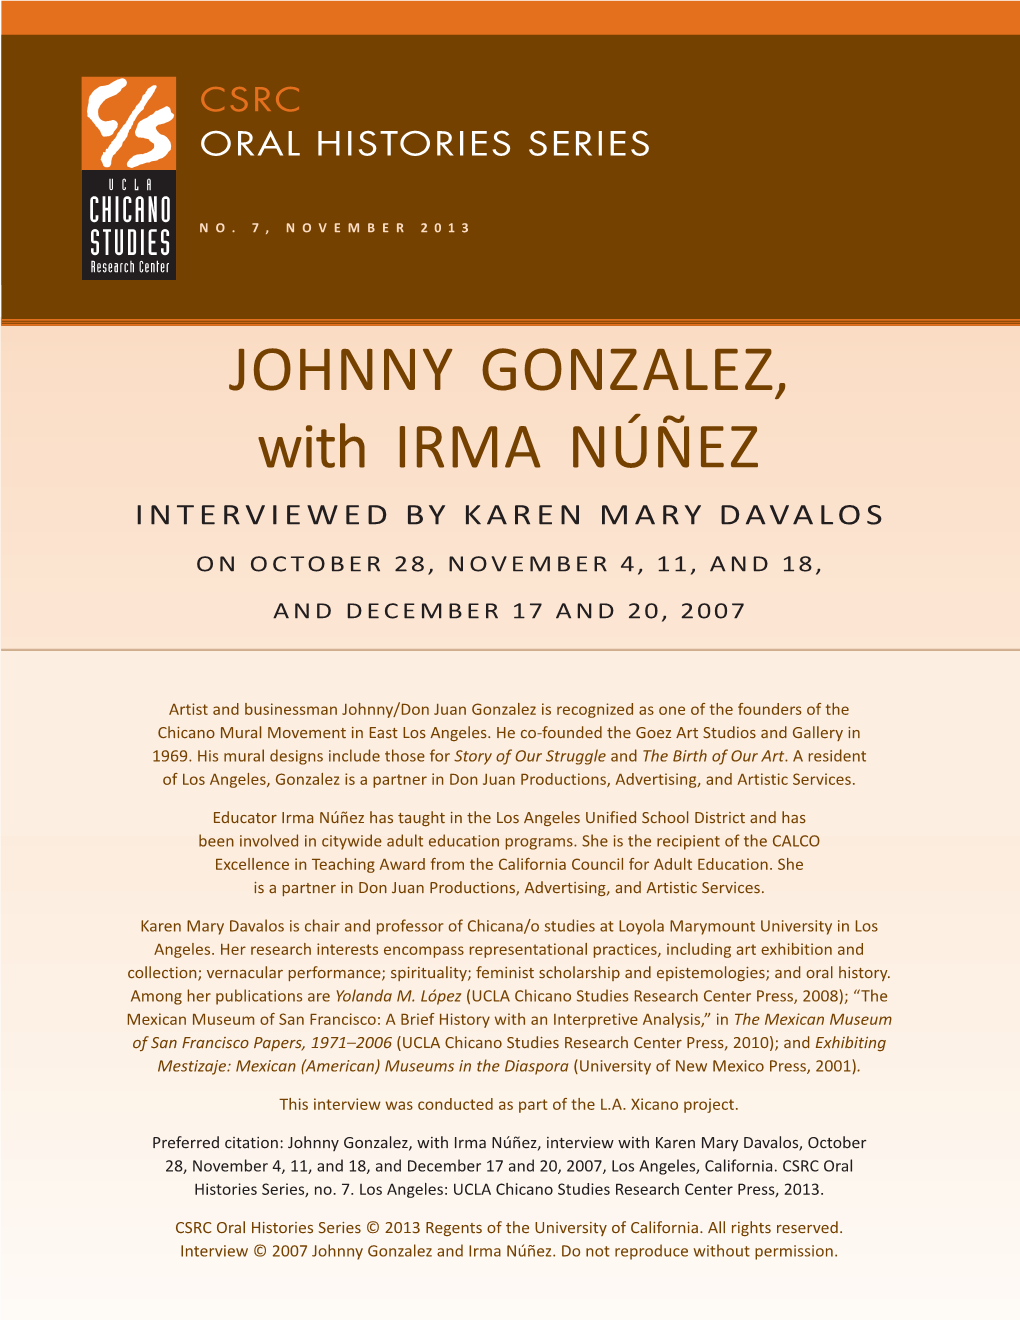 JOHNNY GONZALEZ, with IRMA NÚÑEZ INTERVIEWED by KAREN MARY DAVALOS on OCTOBER 28, NOVEMBER 4, 11, and 18, and DECEMBER 17 and 20, 2007